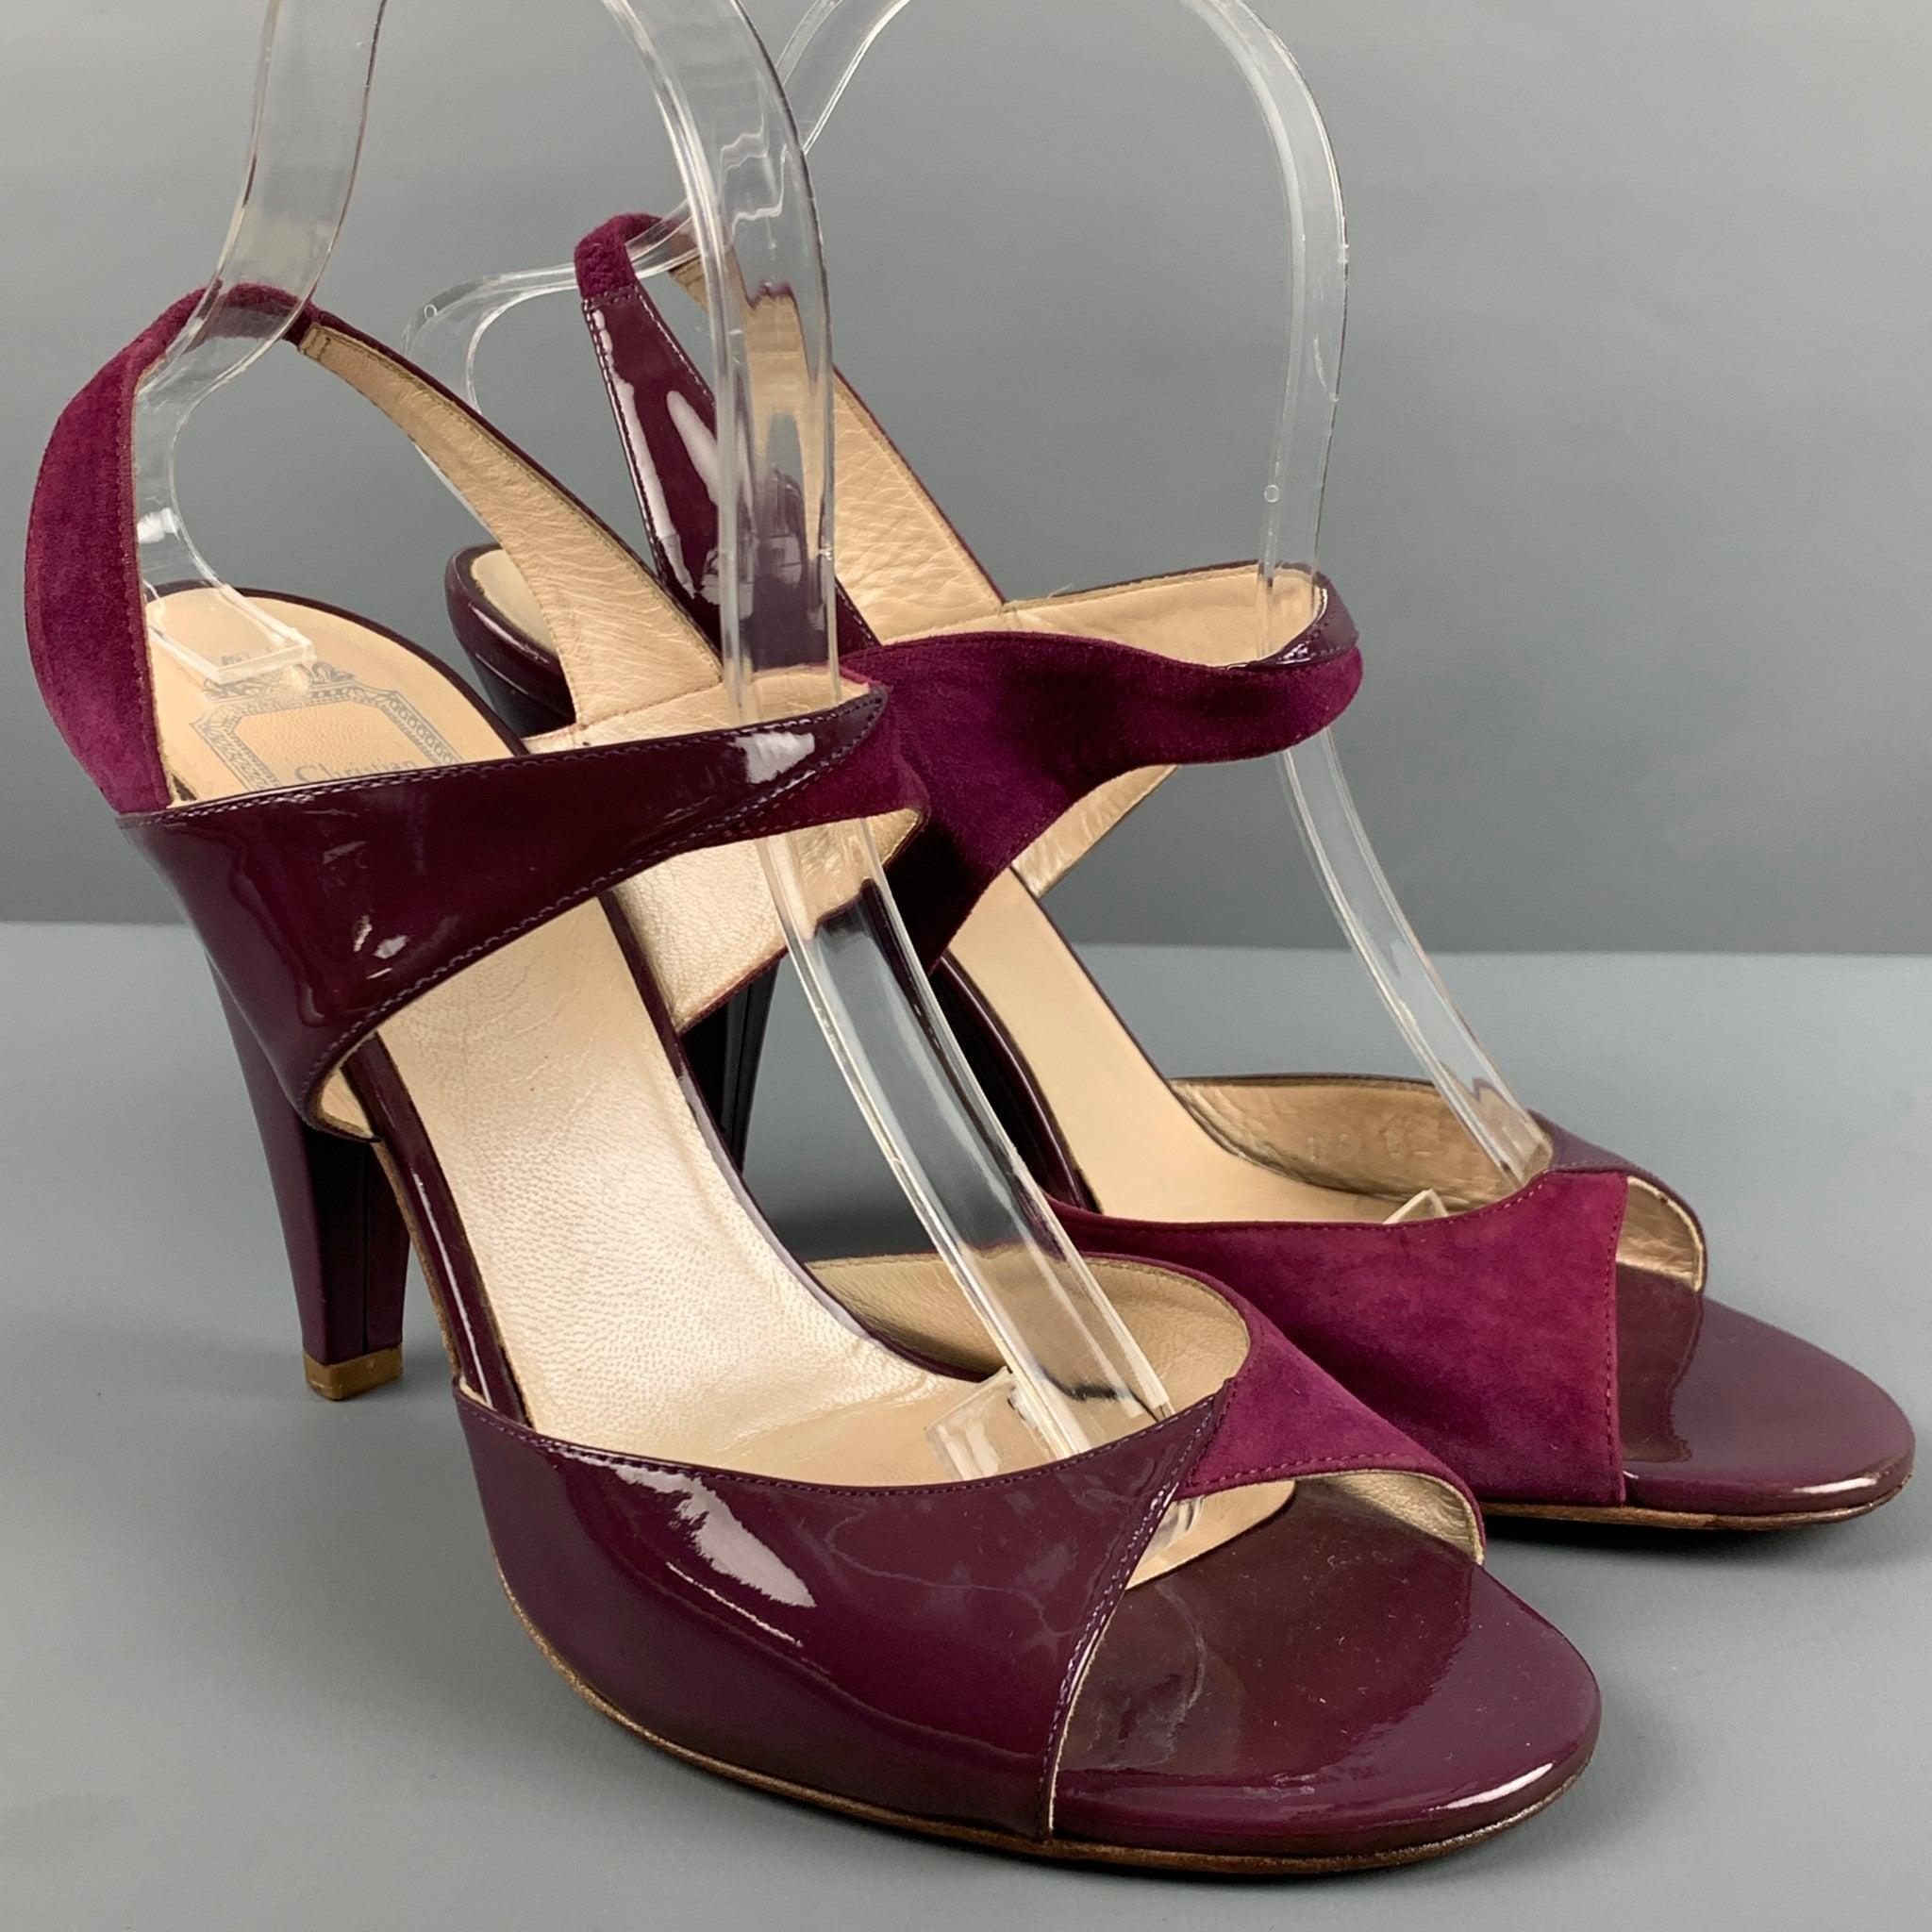 CHRISTIAN DIOR Size 9 Purple Patent Leather Sandals In Good Condition For Sale In San Francisco, CA